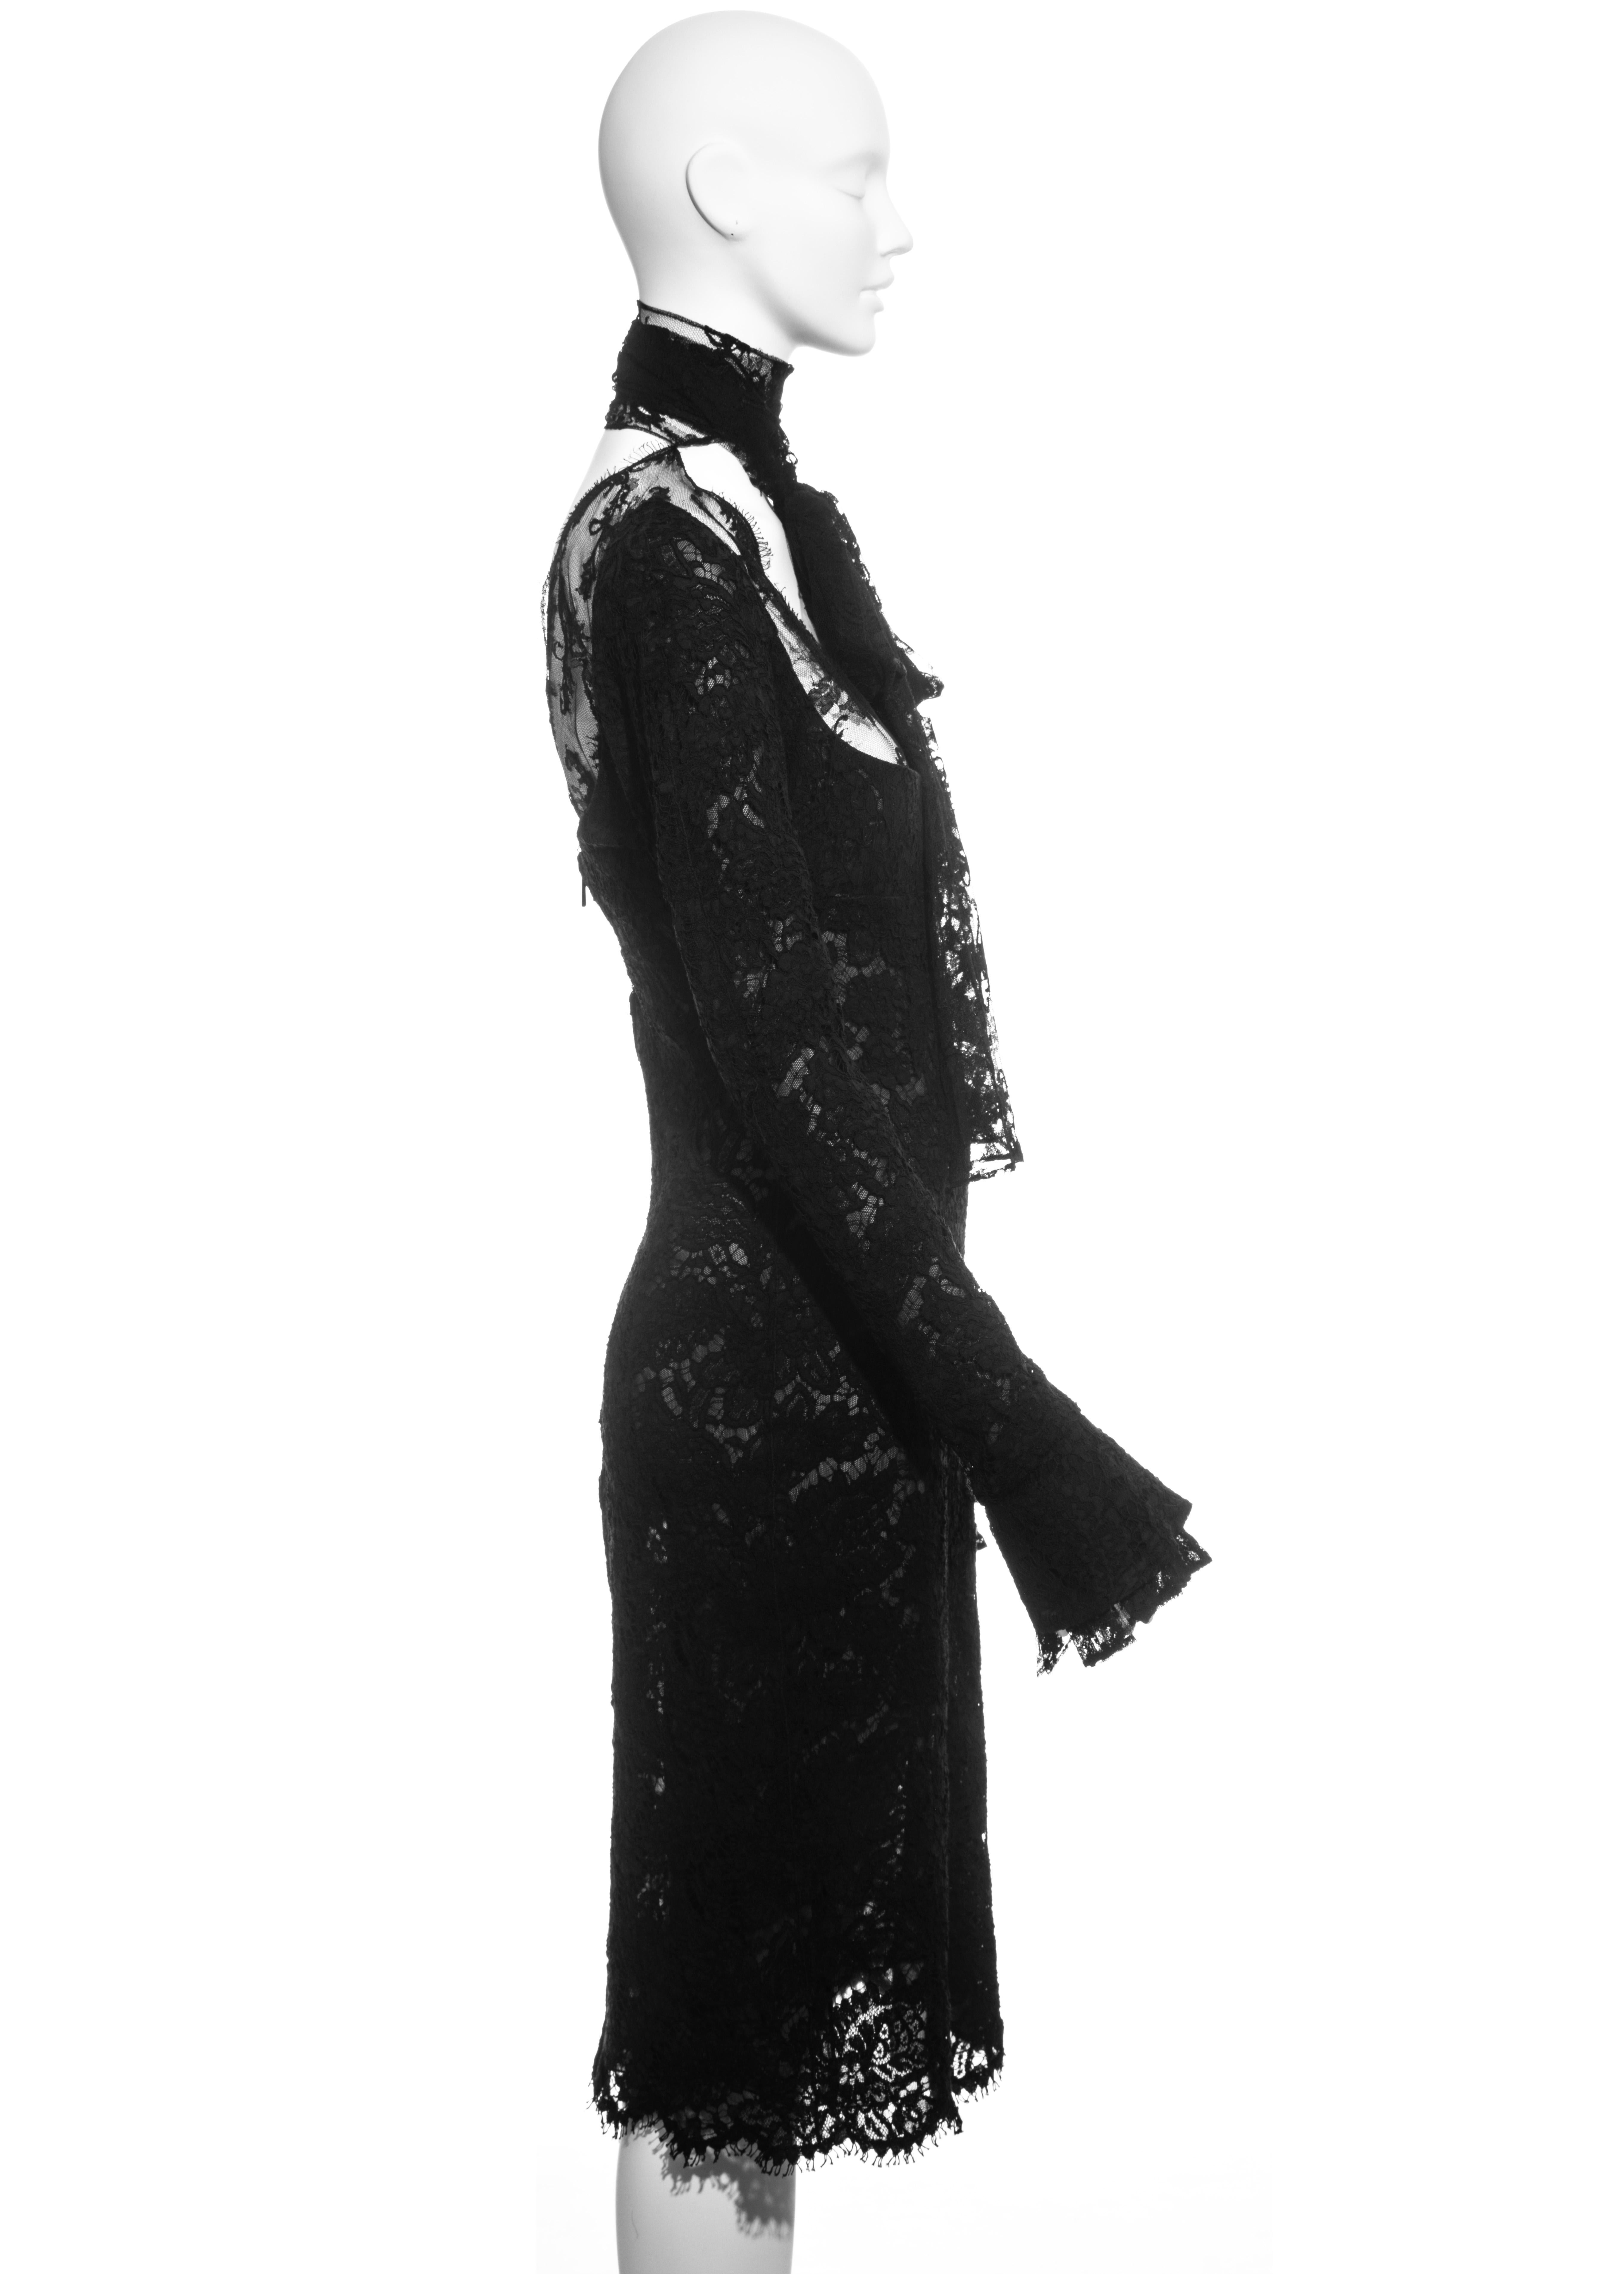 Black Yves Saint Laurent by Tom Ford black lace long-sleeve evening dress, fw 2002